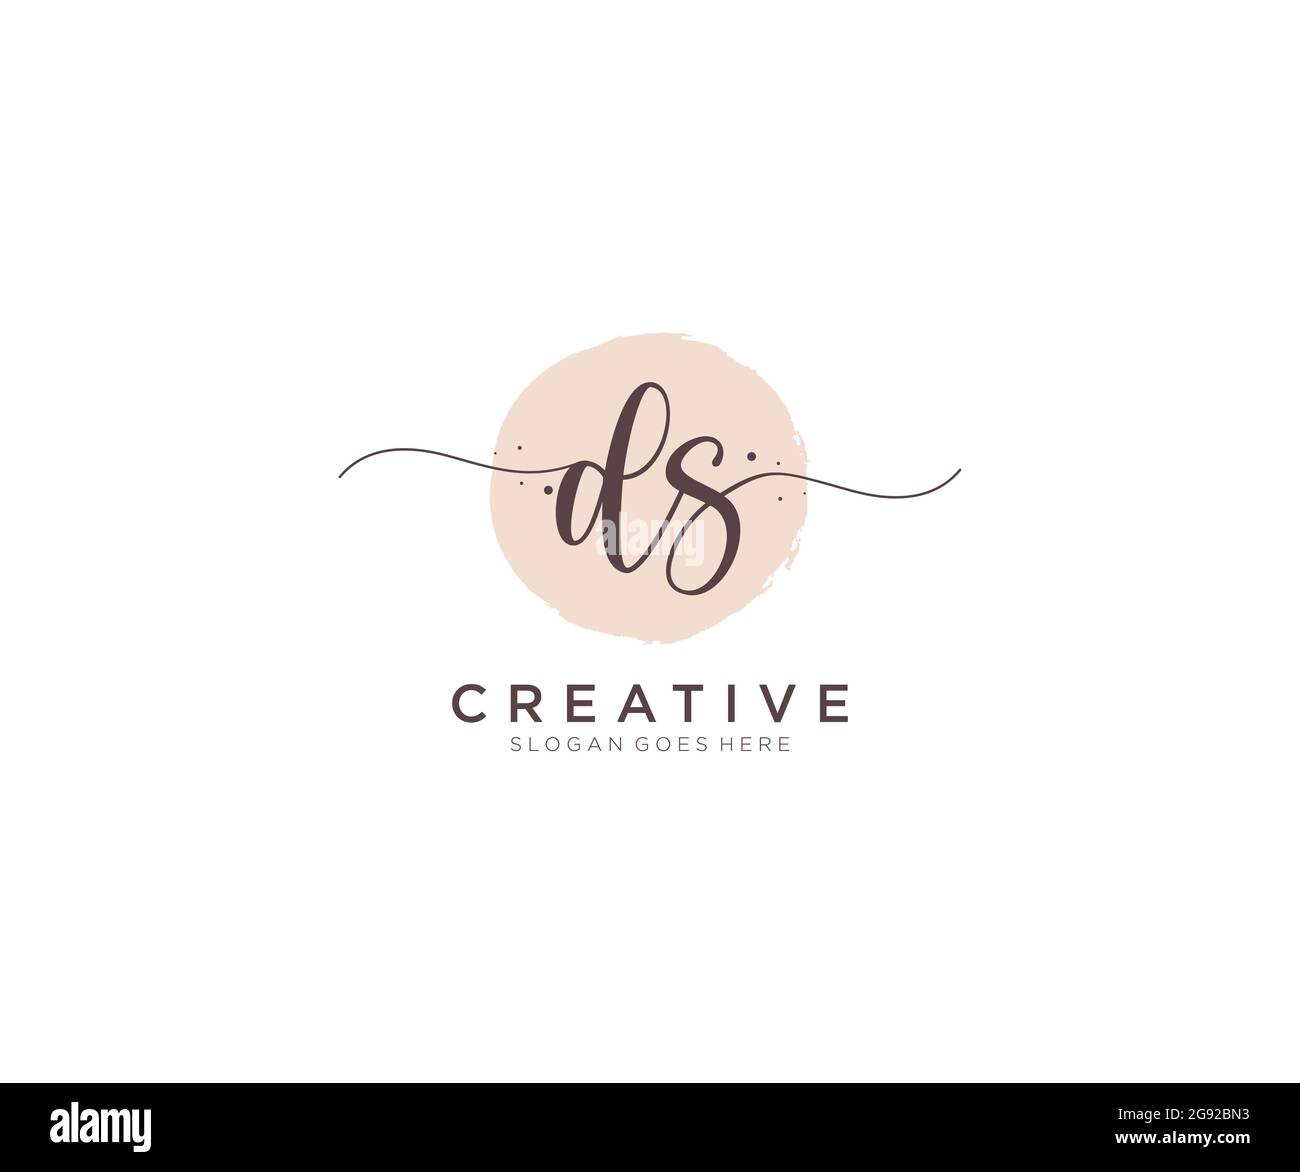 Ds logo design Cut Out Stock Images & Pictures - Alamy